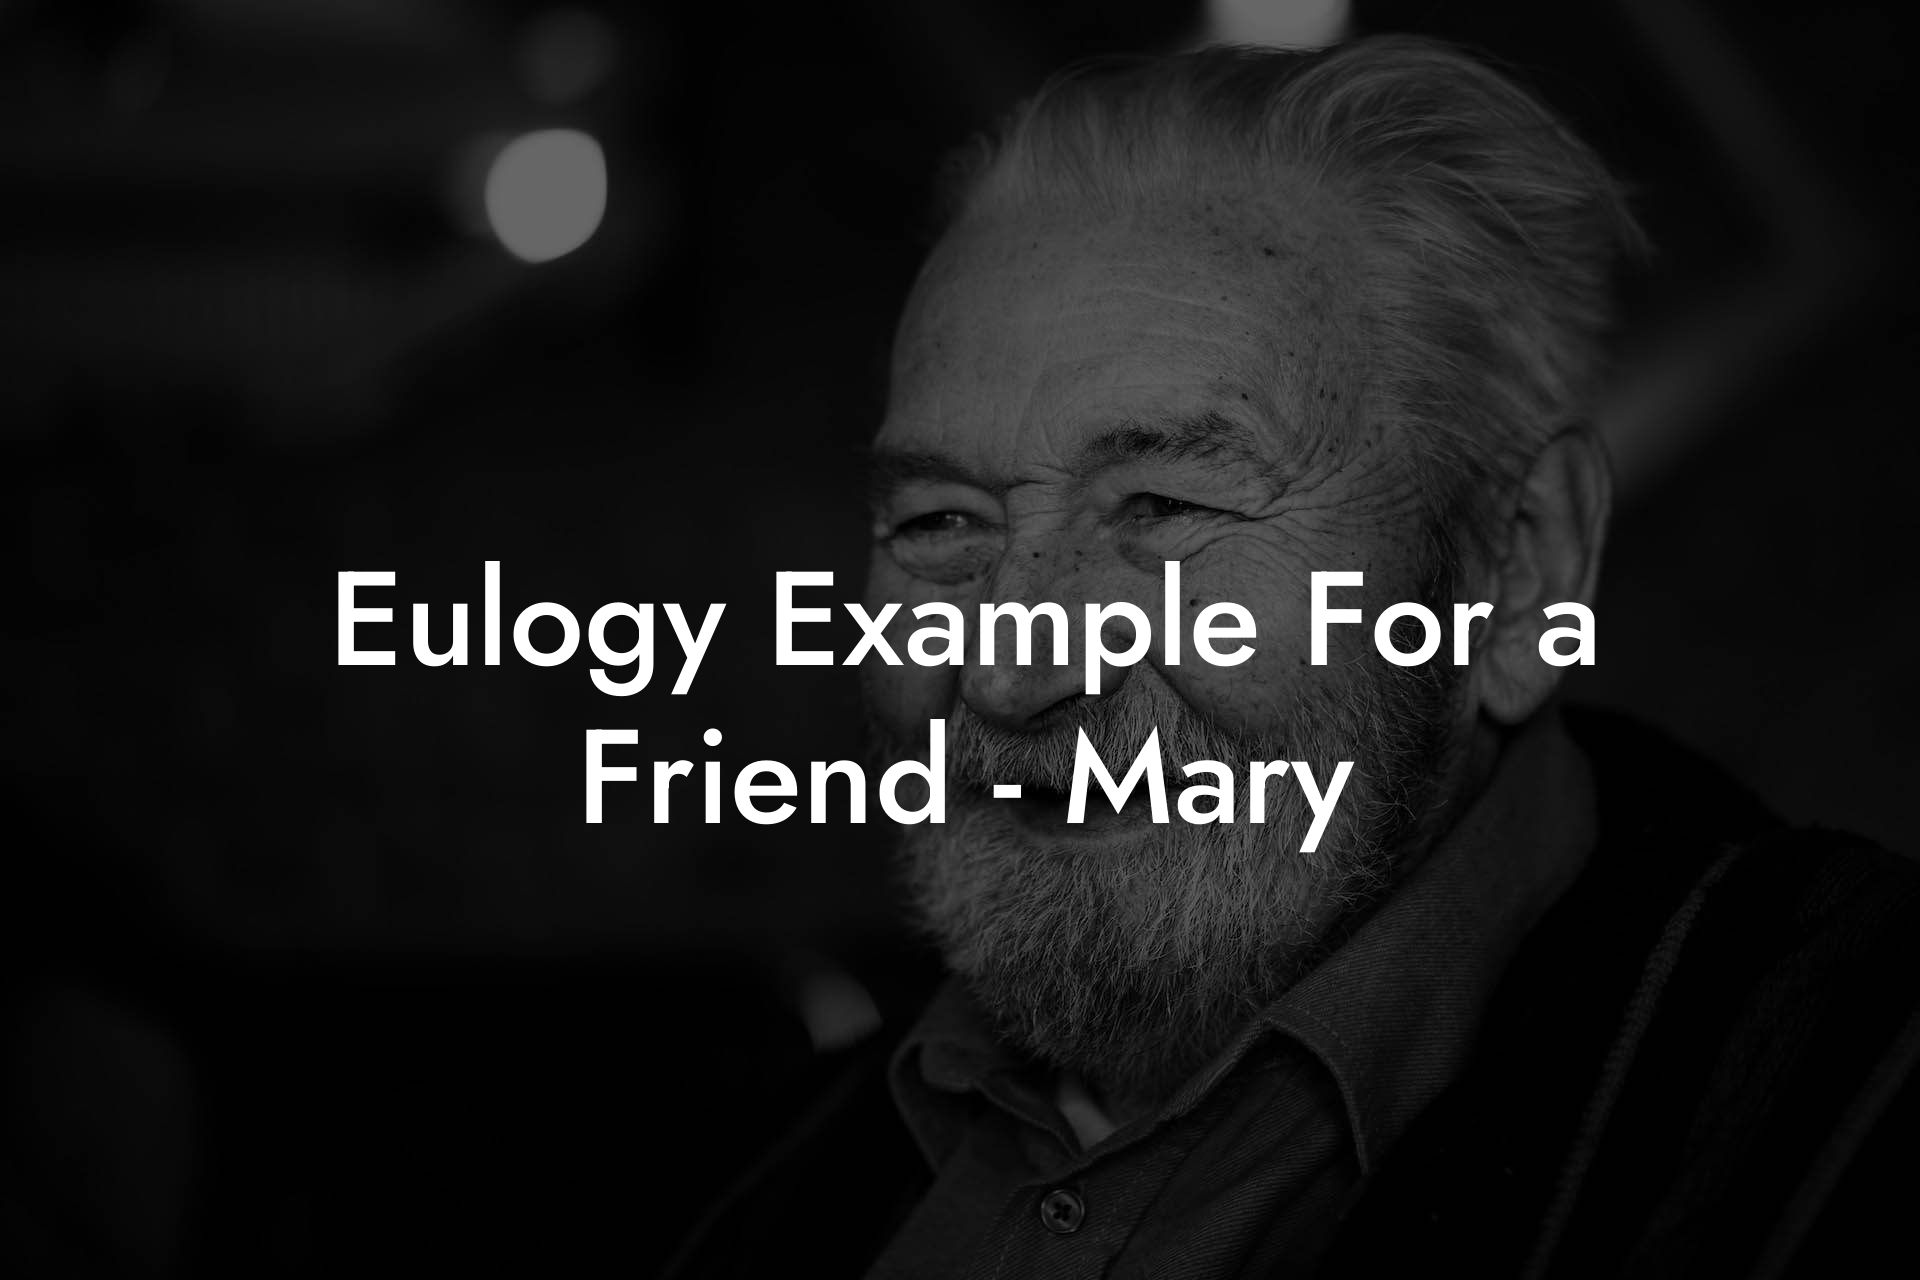 Eulogy Example For a Friend - Mary